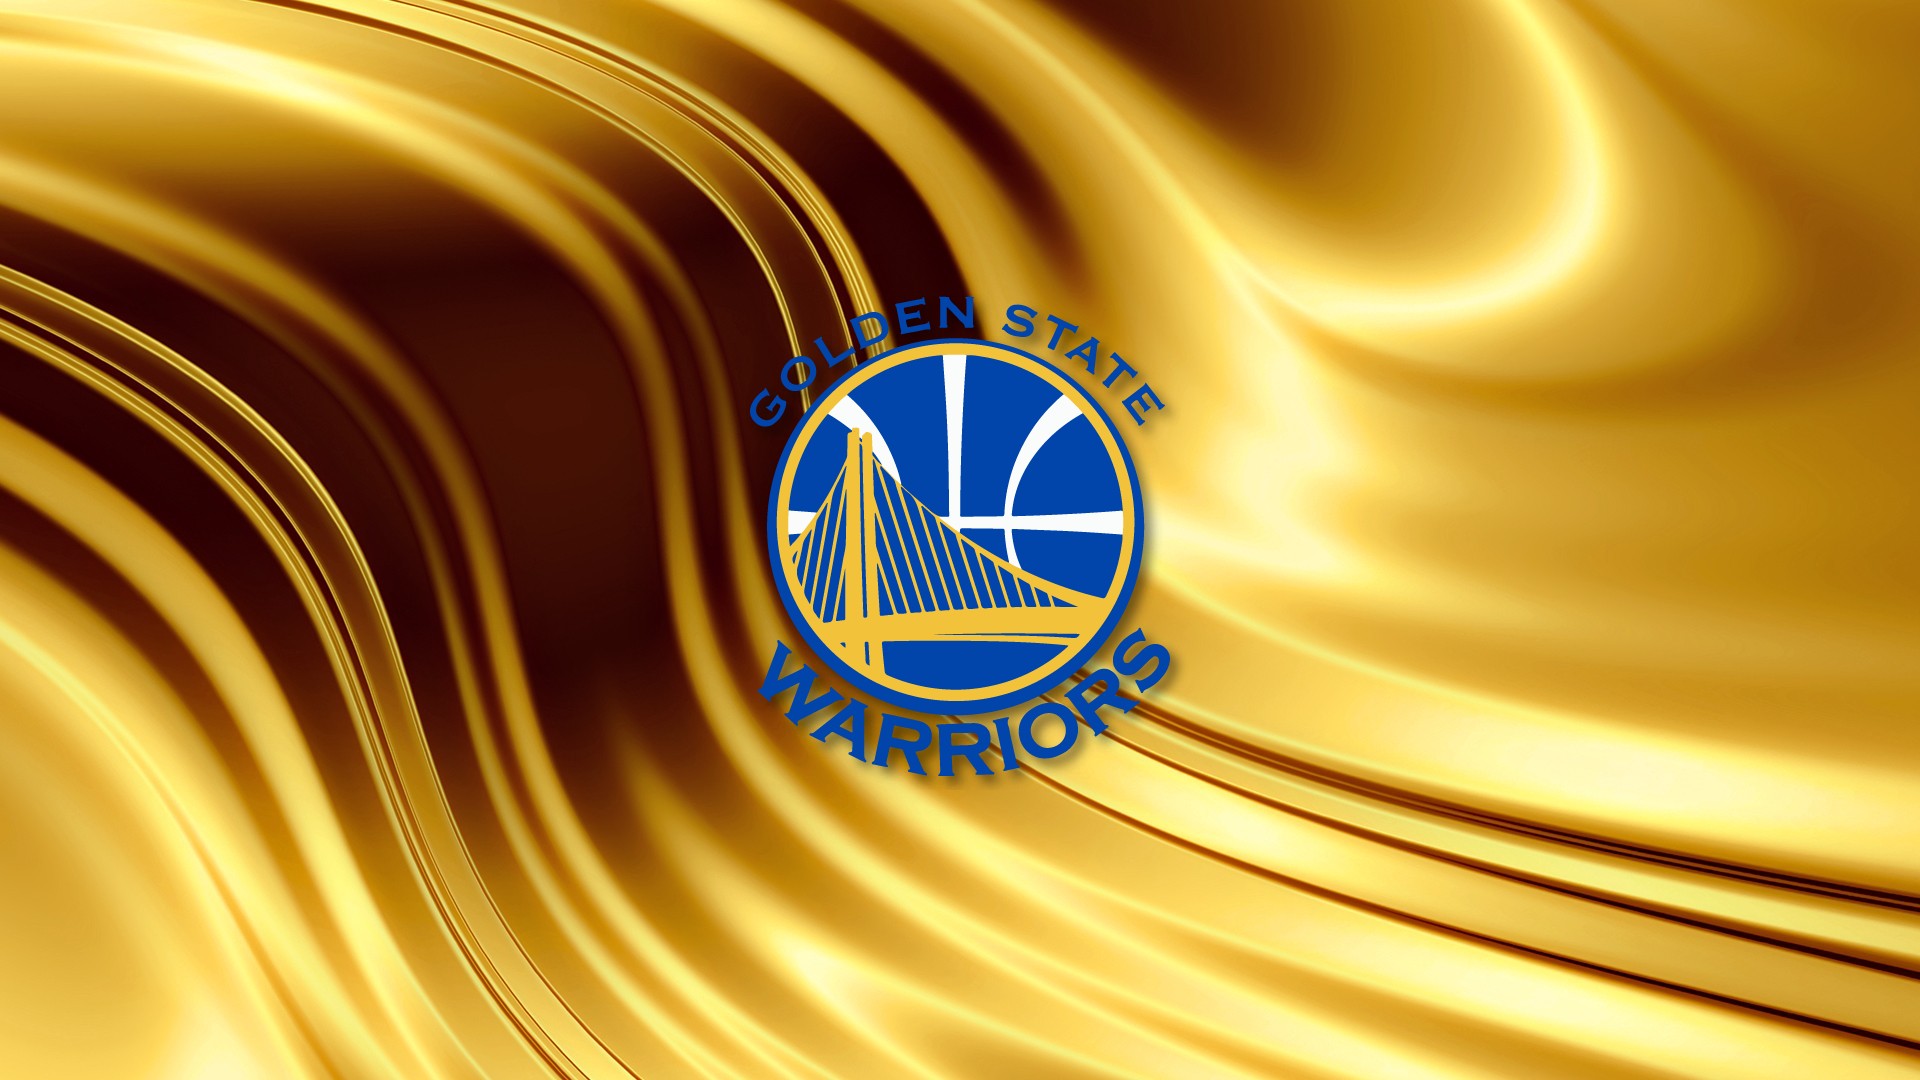 Golden State Warriors Desktop Wallpaper with image resolution 1920x1080 pixel. You can use this wallpaper as background for your desktop Computer Screensavers, Android or iPhone smartphones